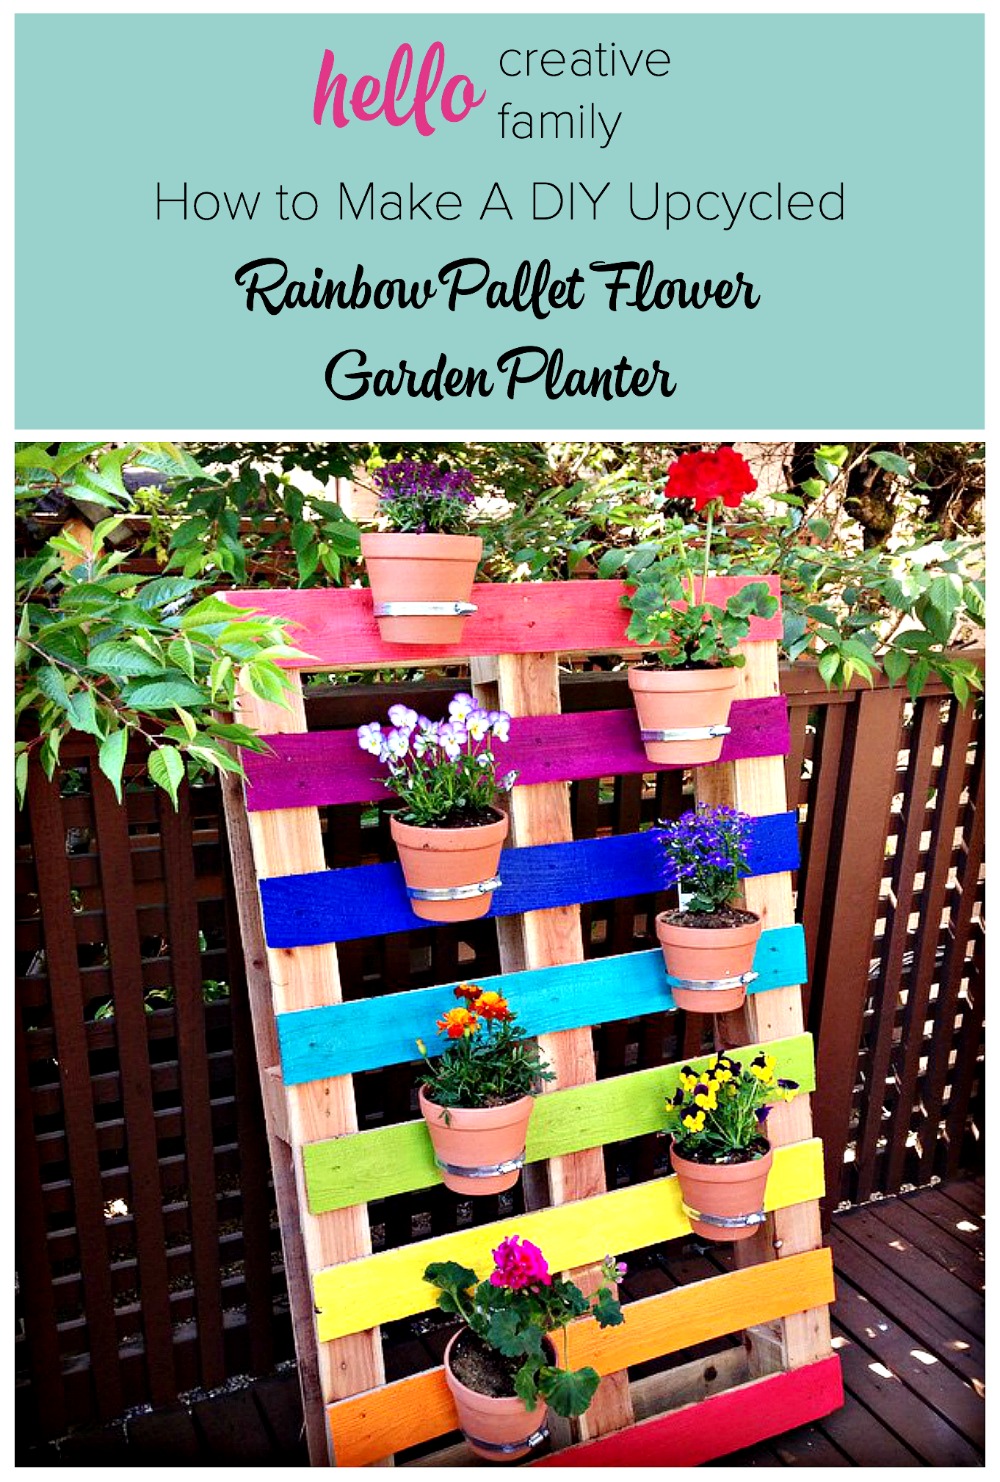 diy pallet garden planter flower rainbow upcycled projects family crafts creative project gardening pallets craft planters colorful weekend bright kids